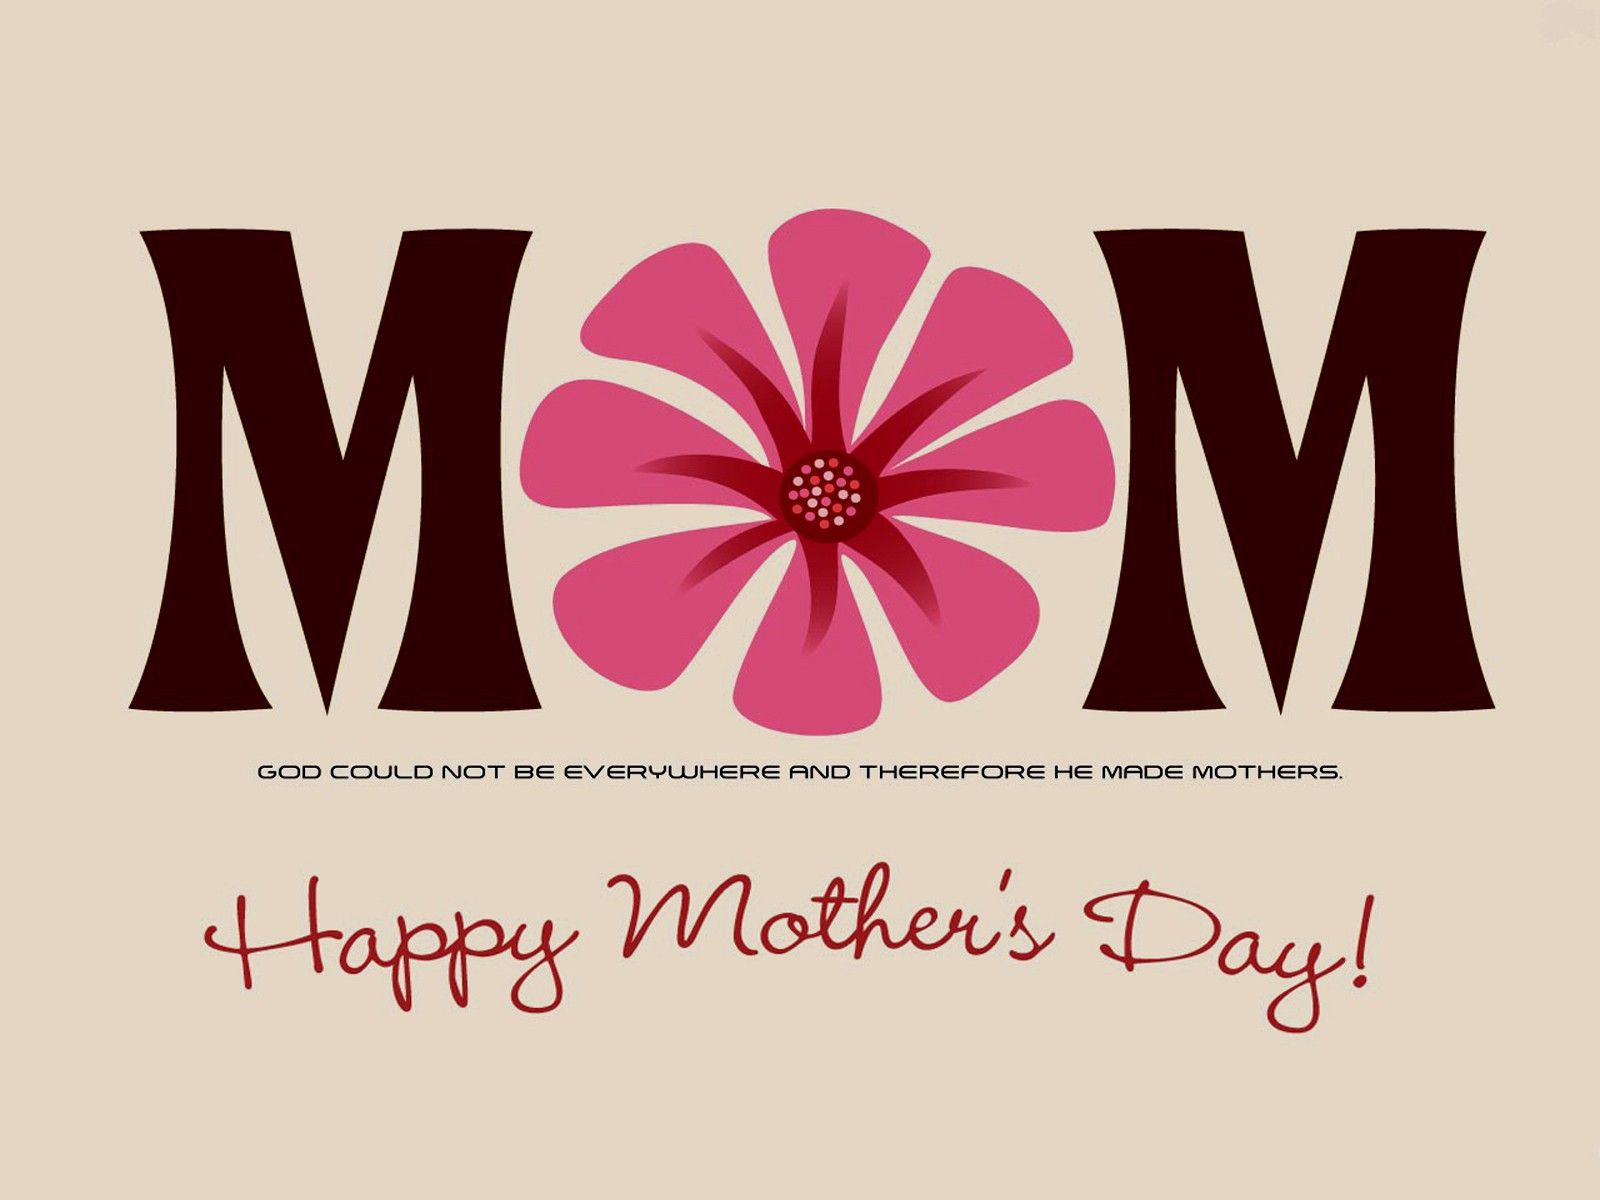 Happy Mothers Day Wishes 2021